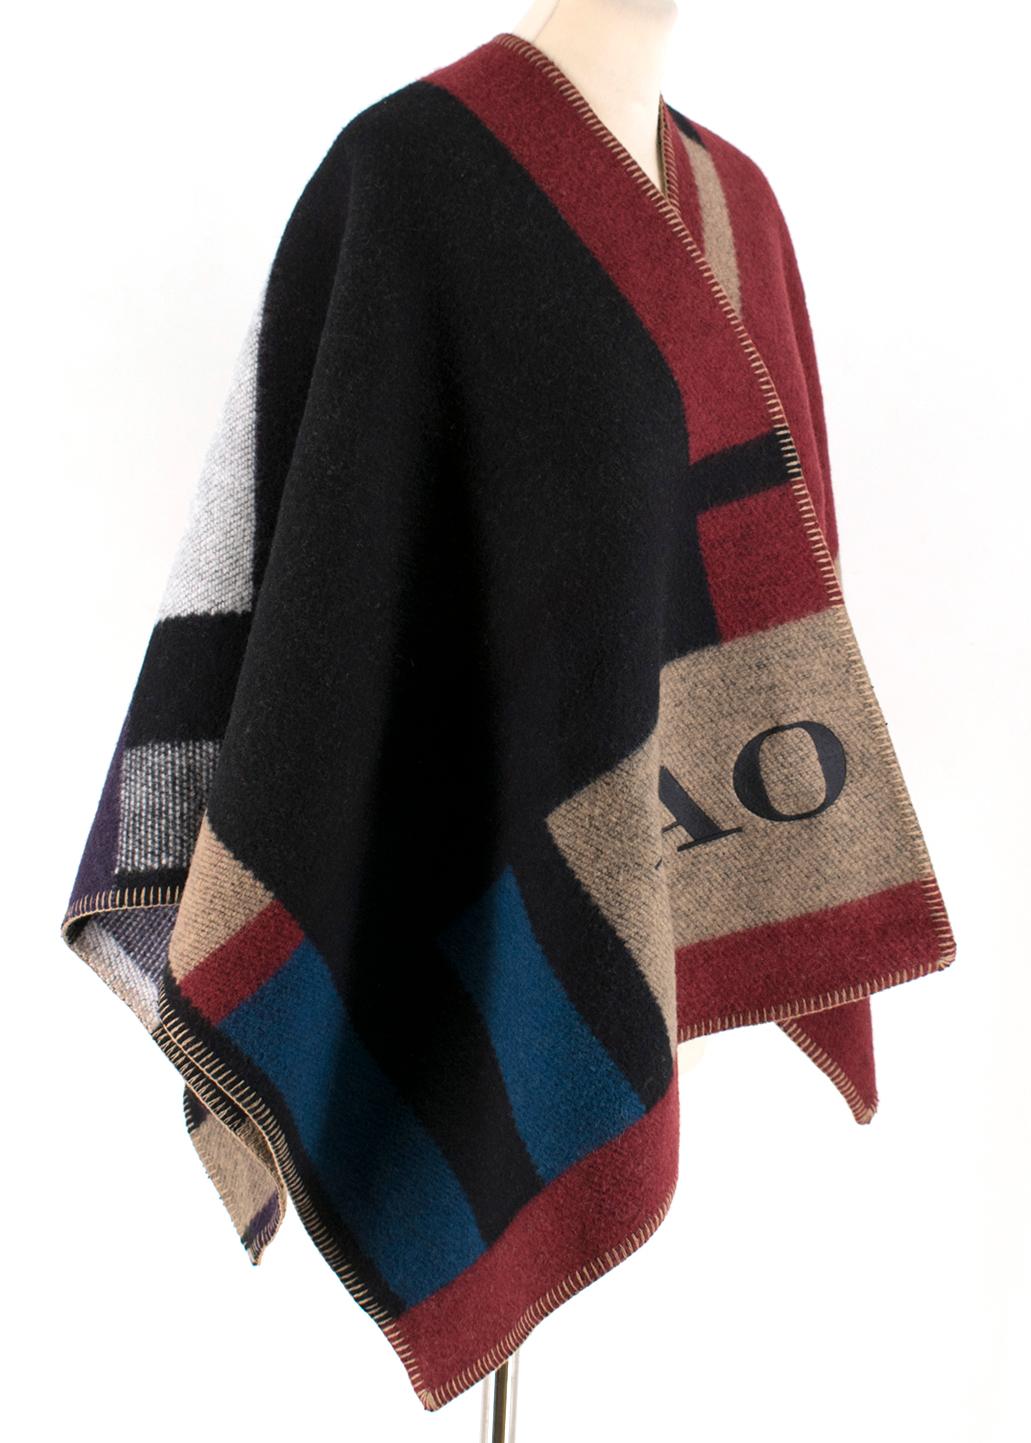 Burberry Colour Block Check Blanket Poncho 

- Wool poncho cape
- Check colour block
- Contrasting stitch trim
- Please note that the cape has been personalised 

Please note, these items are pre-owned and may show some signs of storage, even when